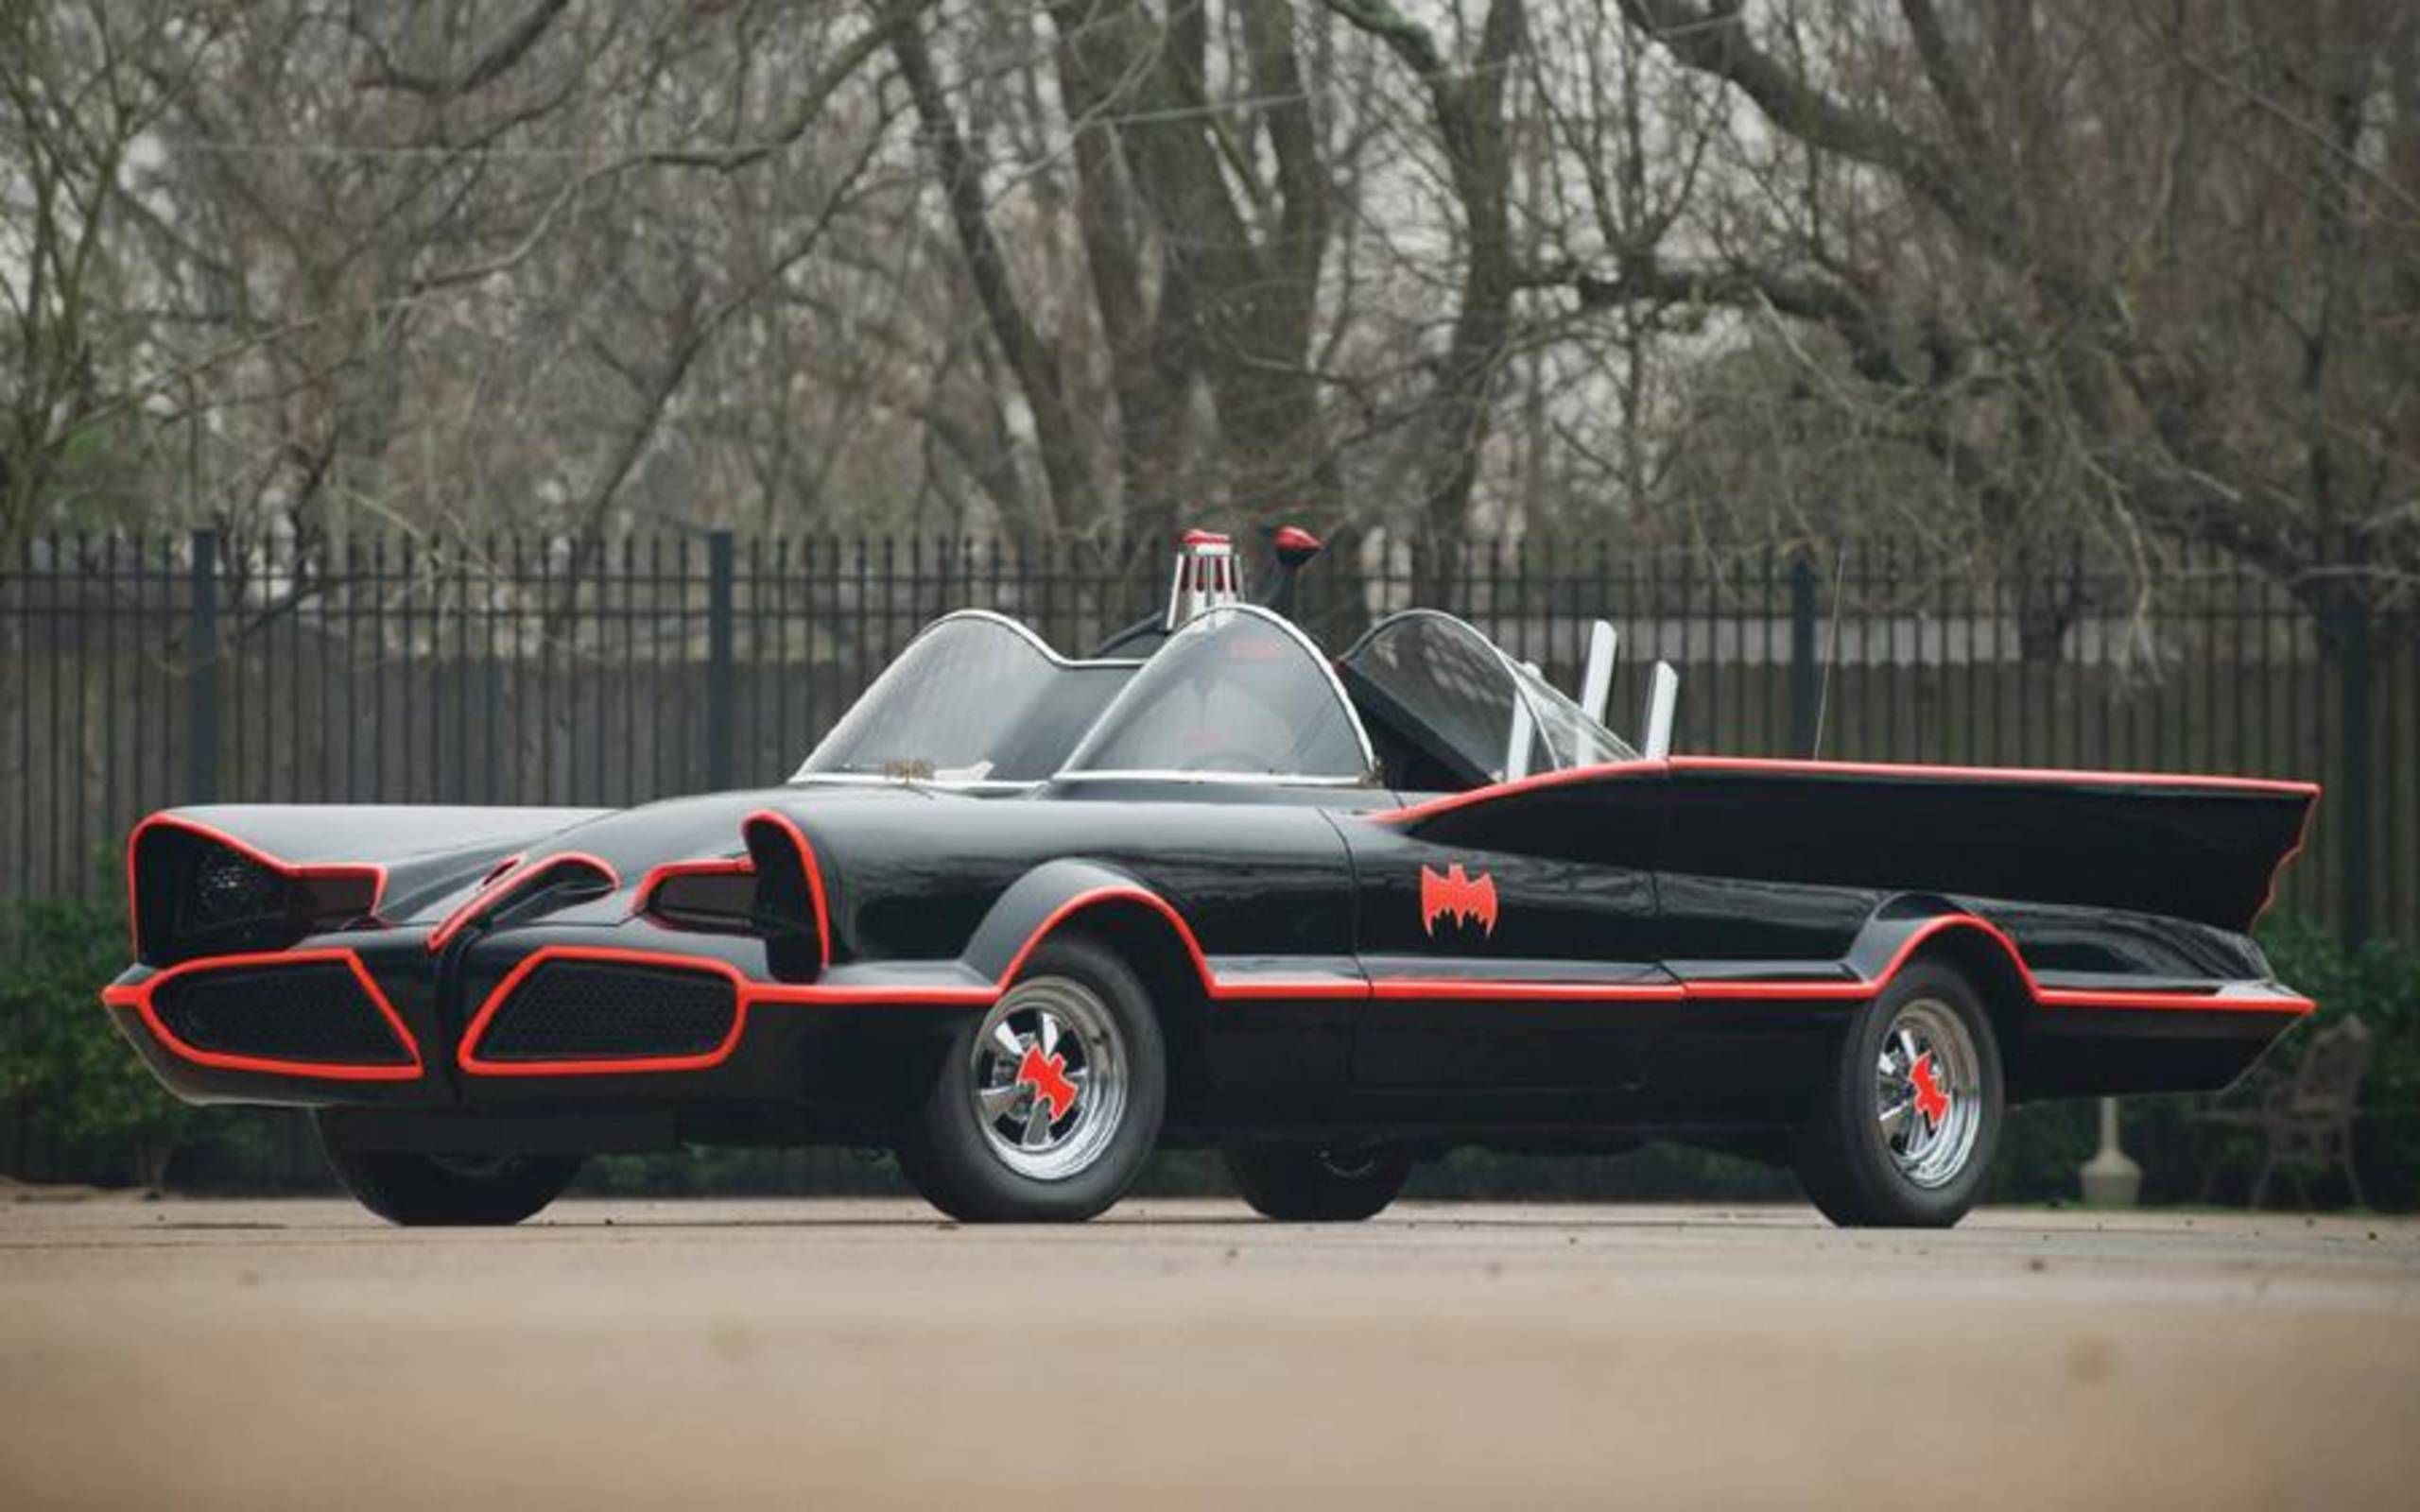 The Batmobile returns to its roots